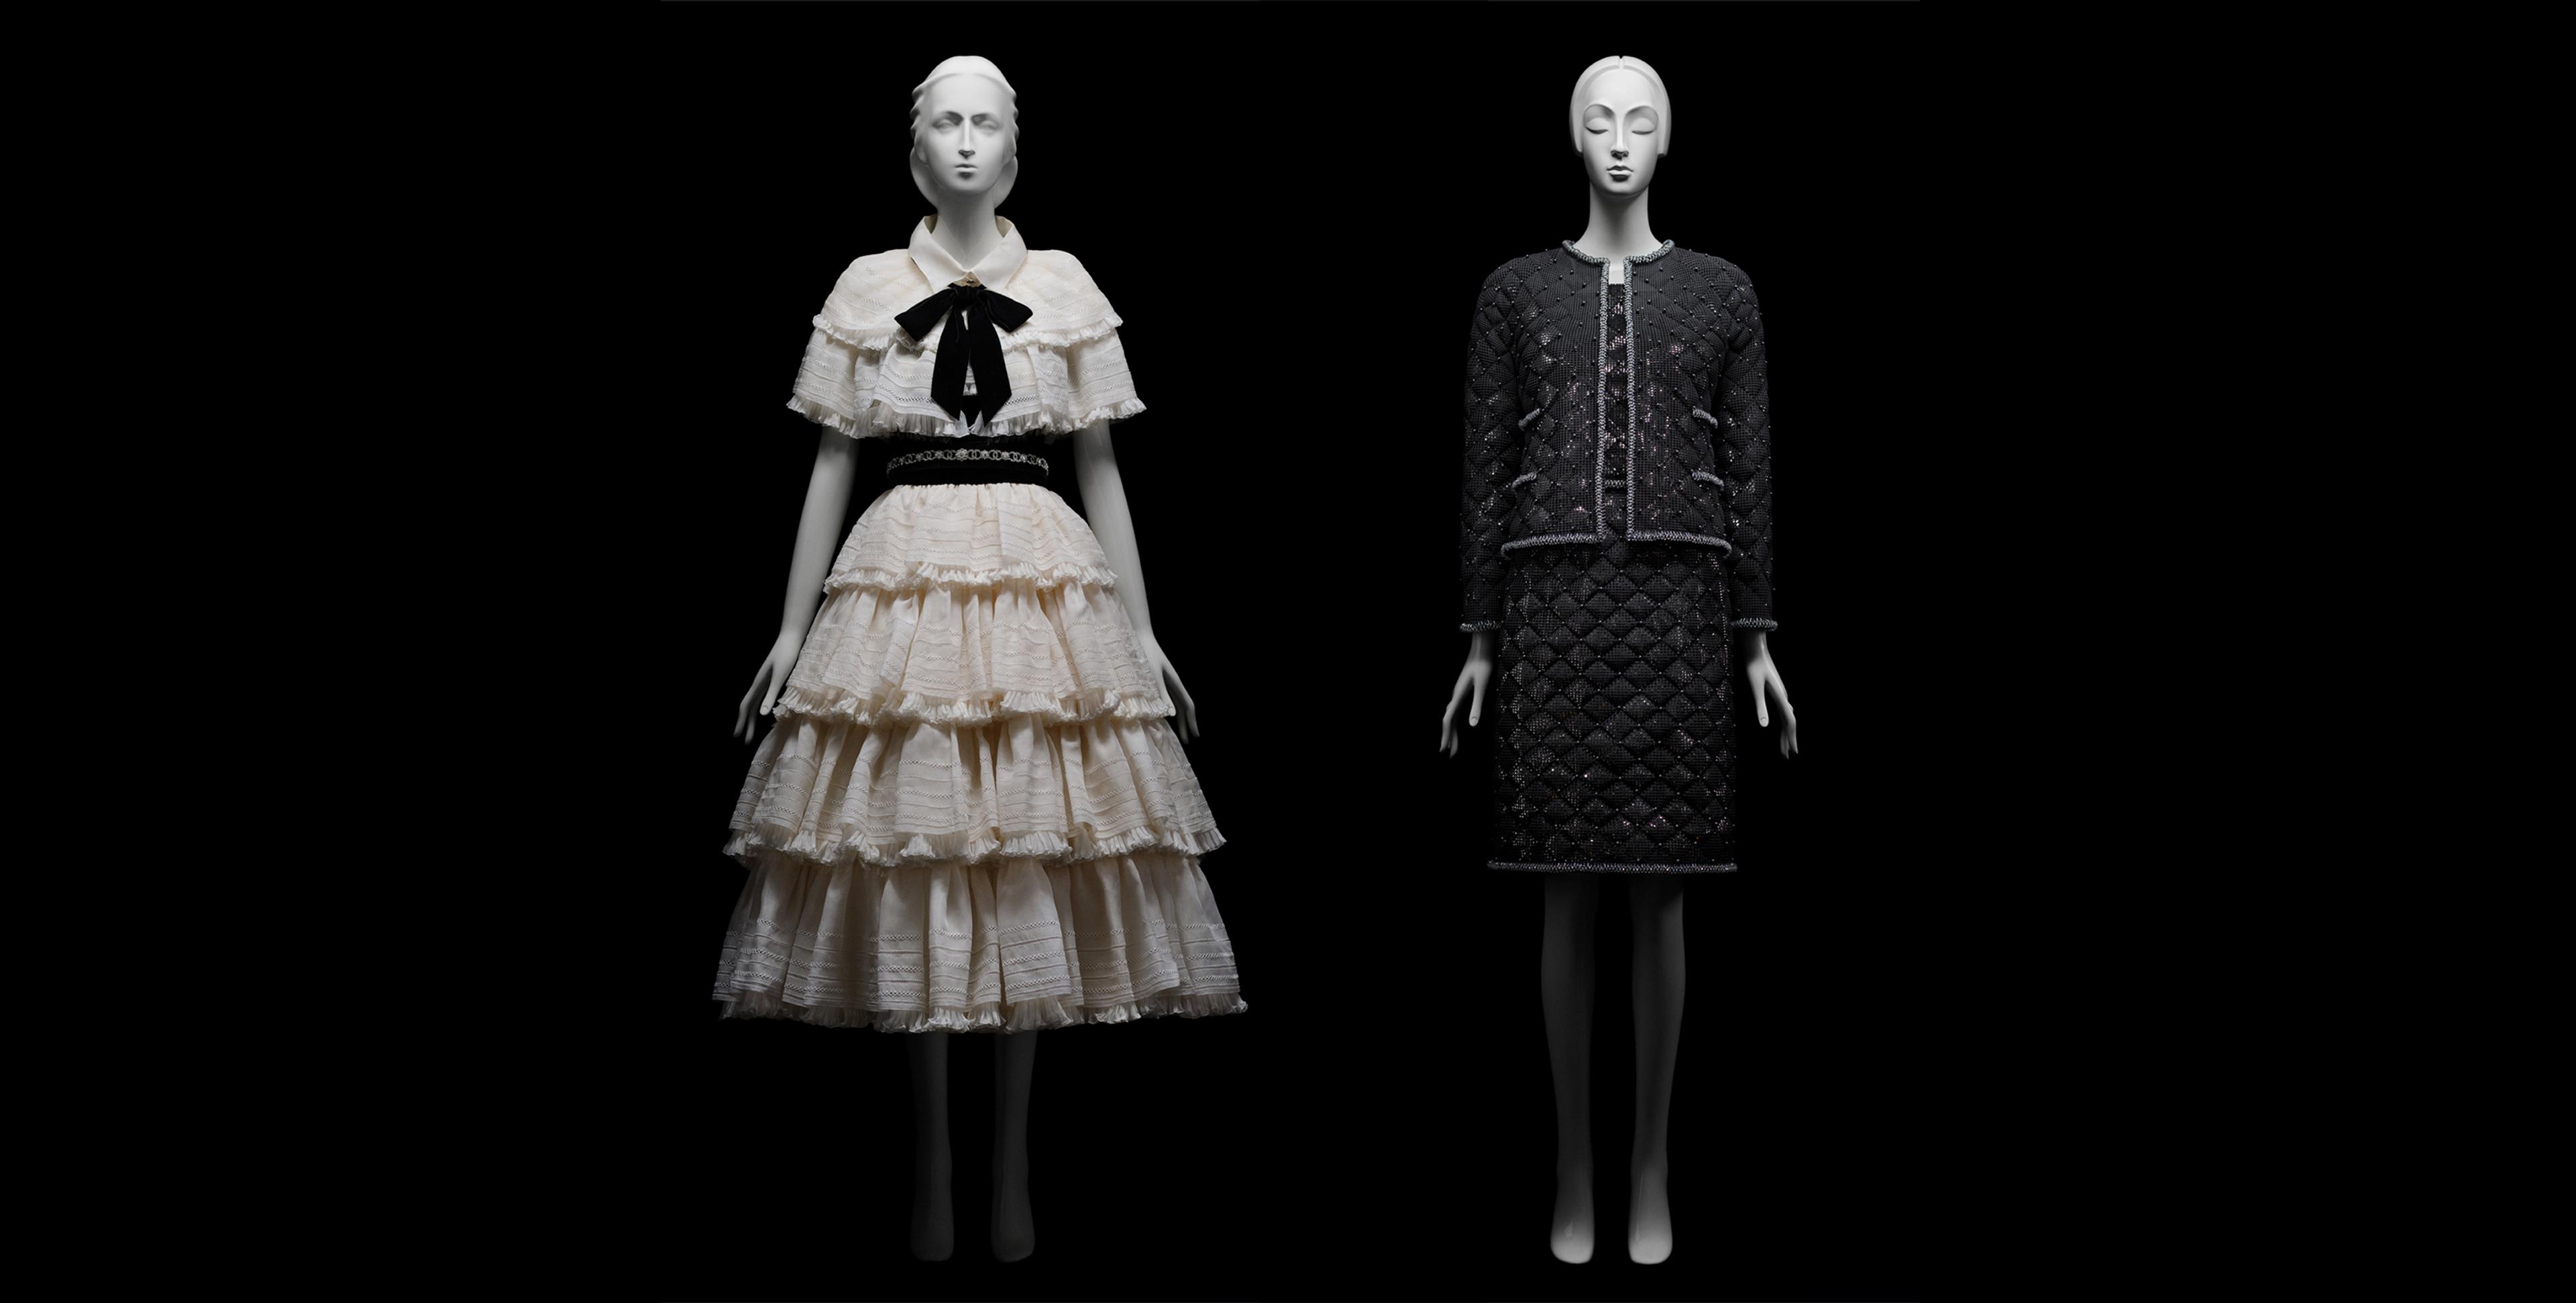 Image of two lagerfeld dresses